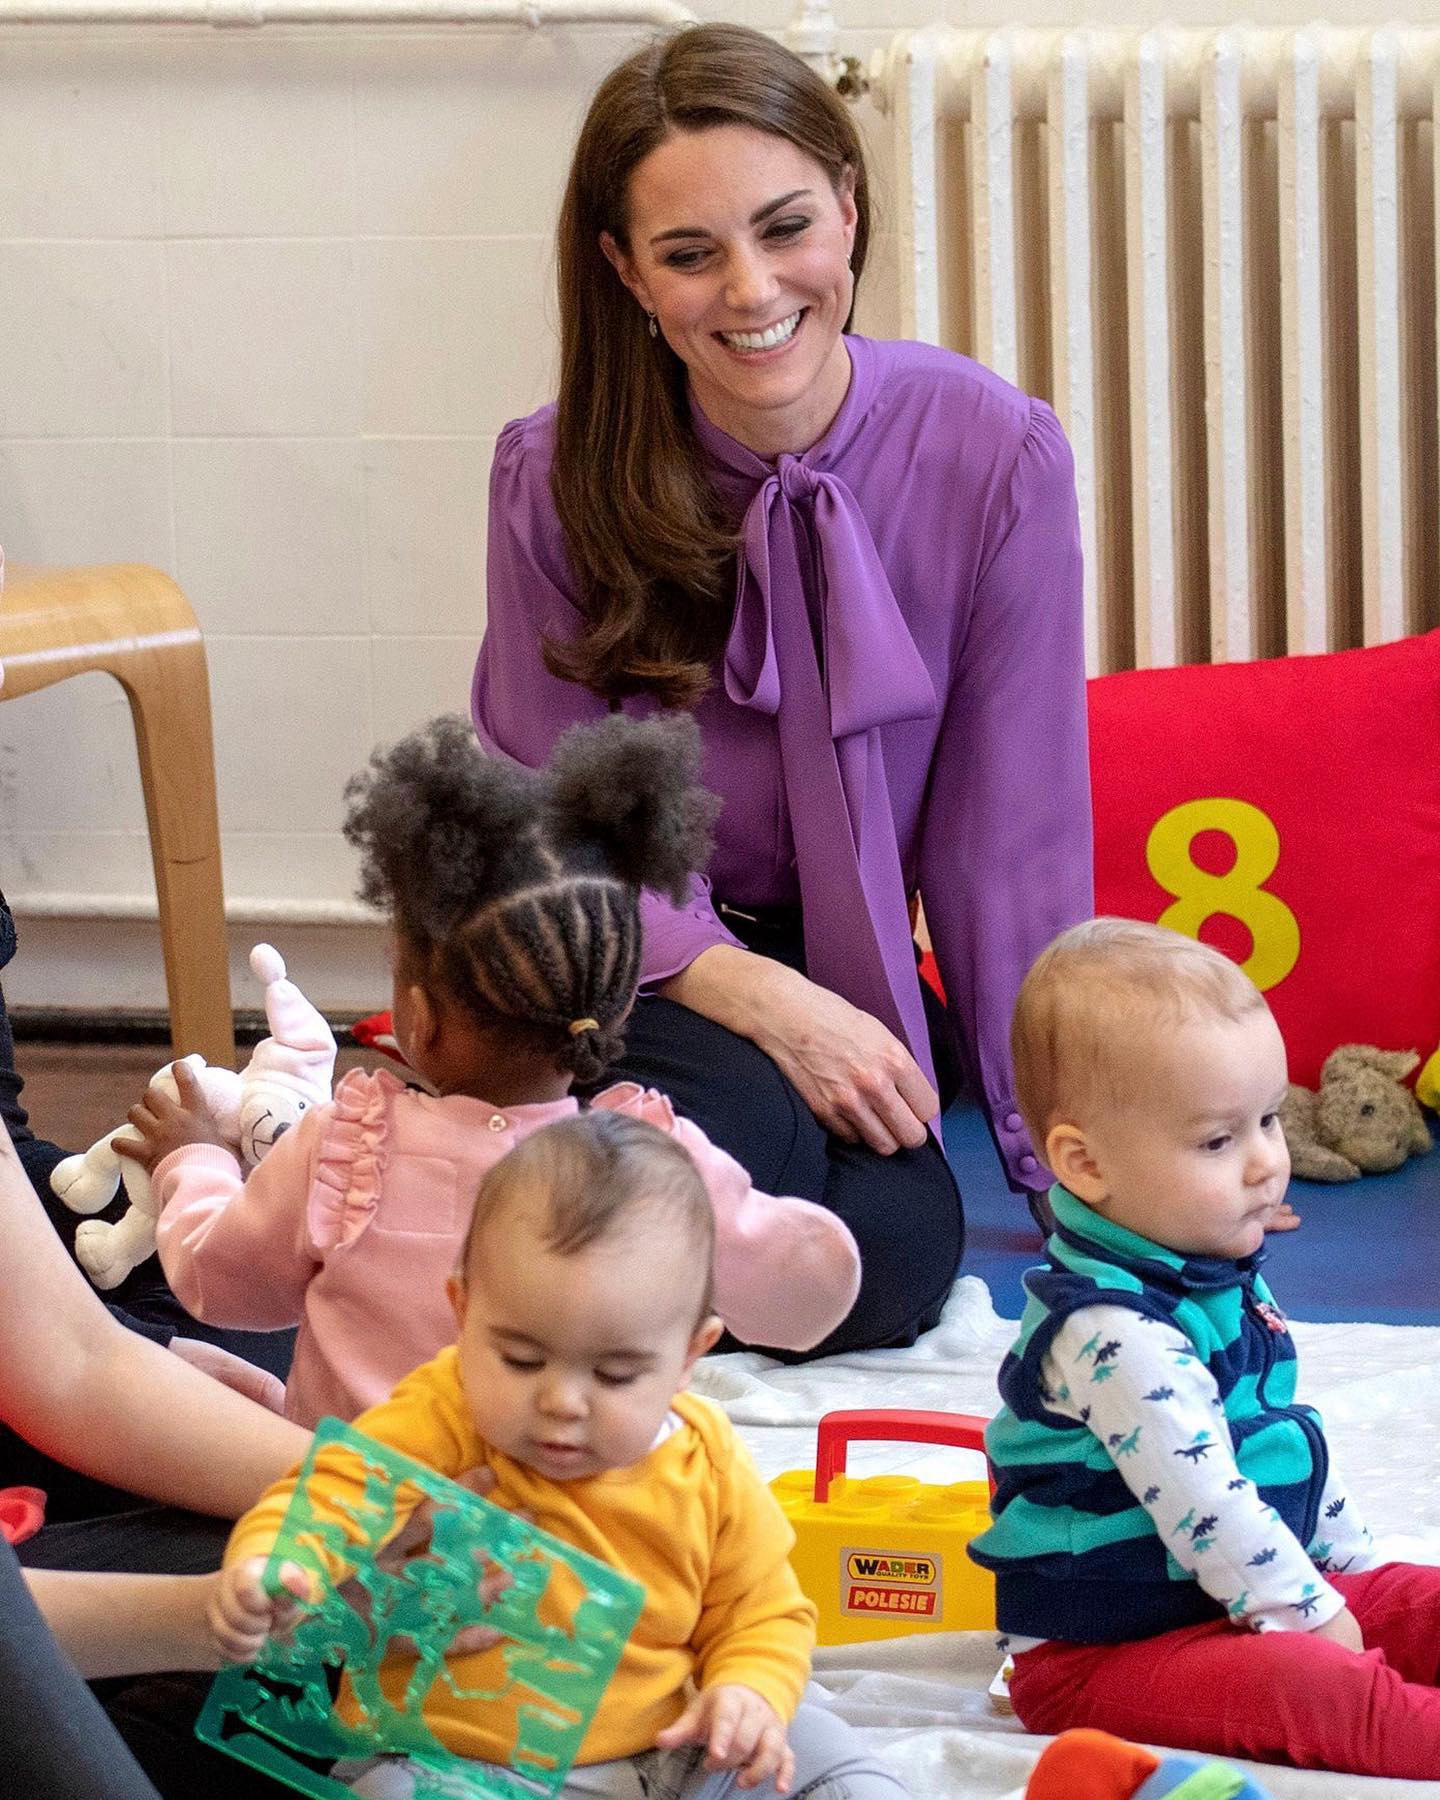 Vanities - Over the past few years, Kate Middleton has become the world’s most visible spokesperson